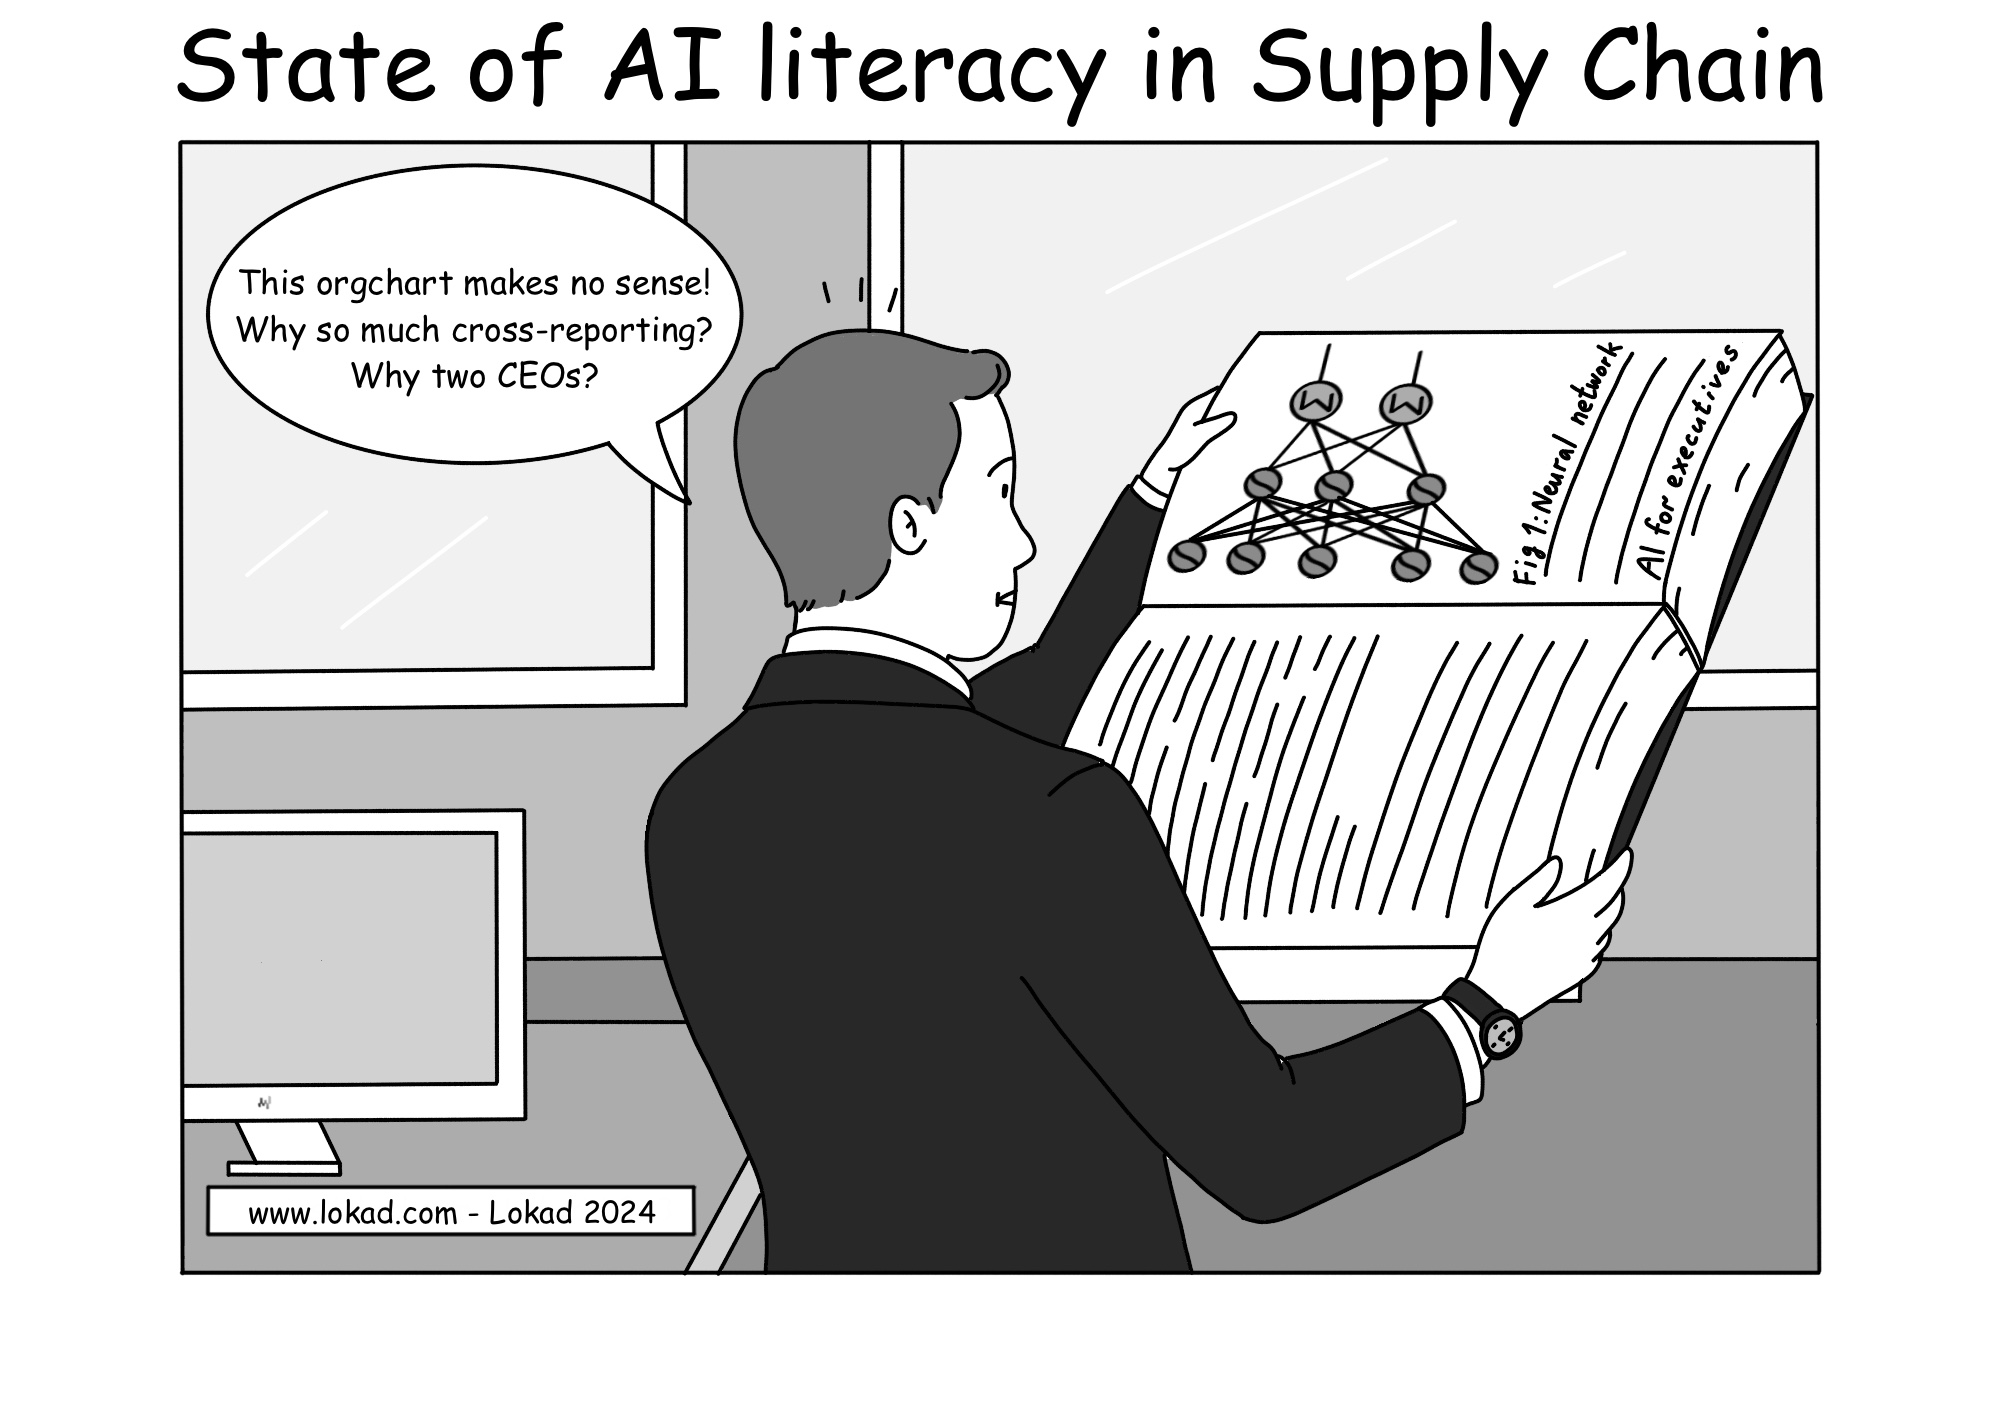 State of AI literacy in Supply Chain.